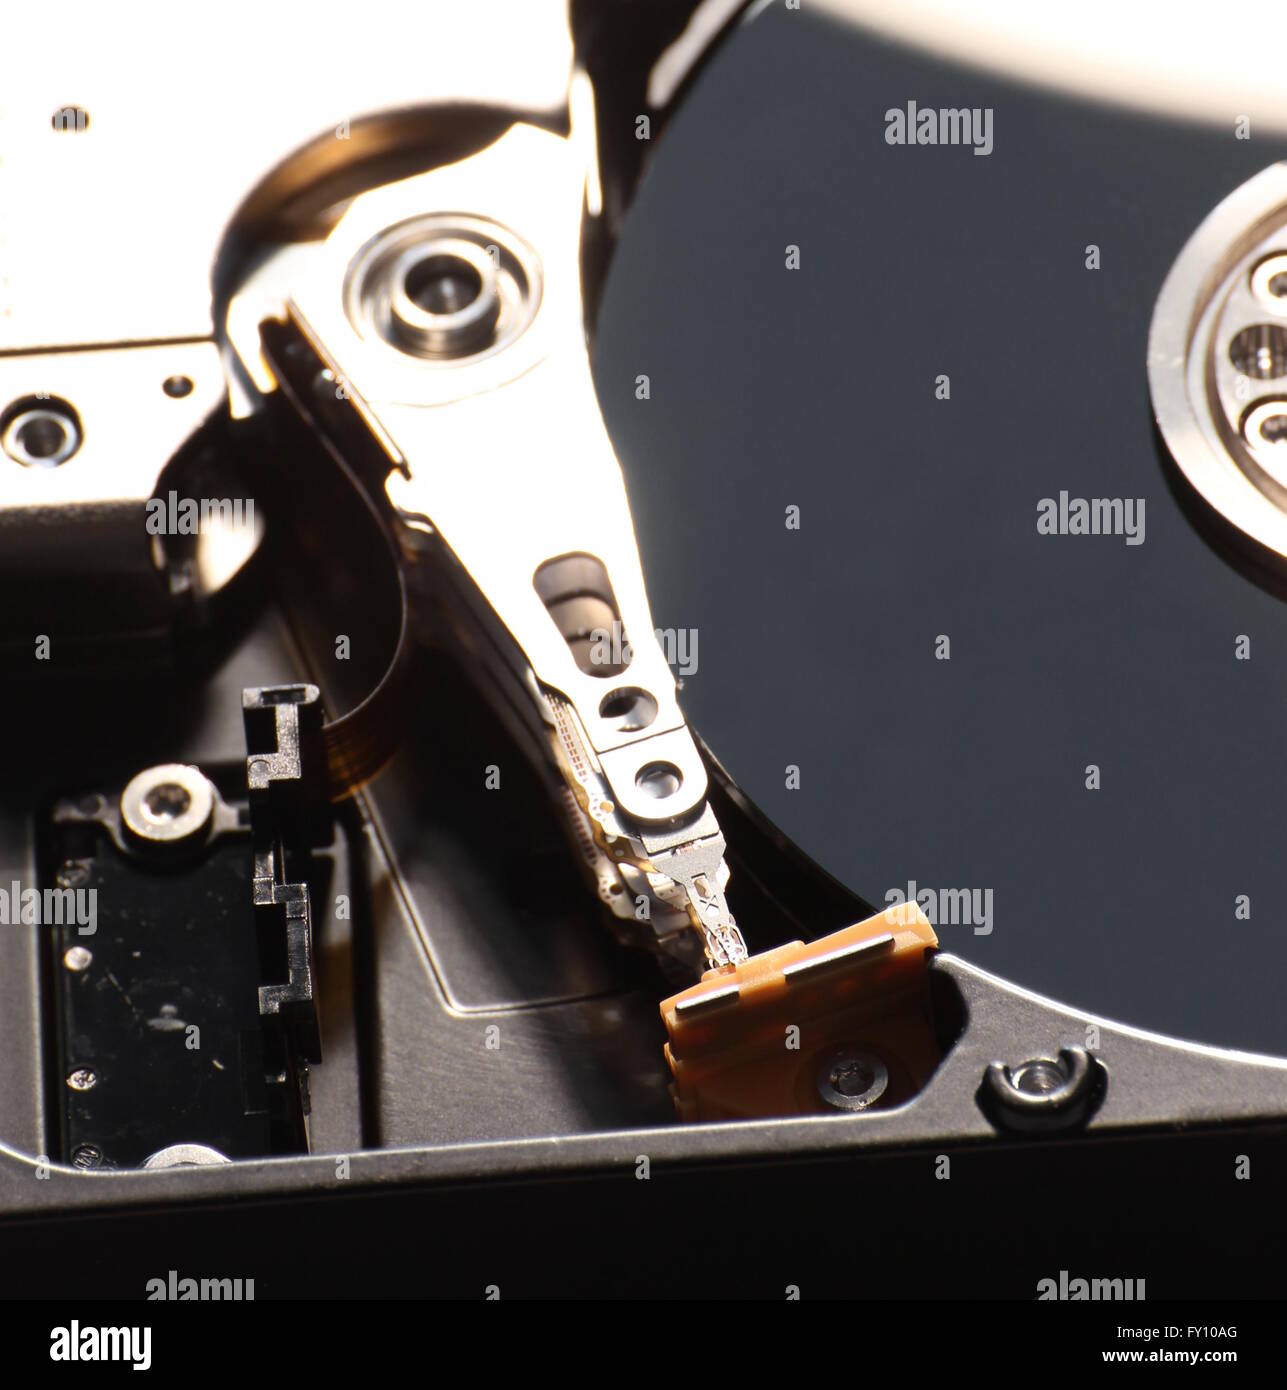 Hard disk, close-up of the reading head. Stock Photo